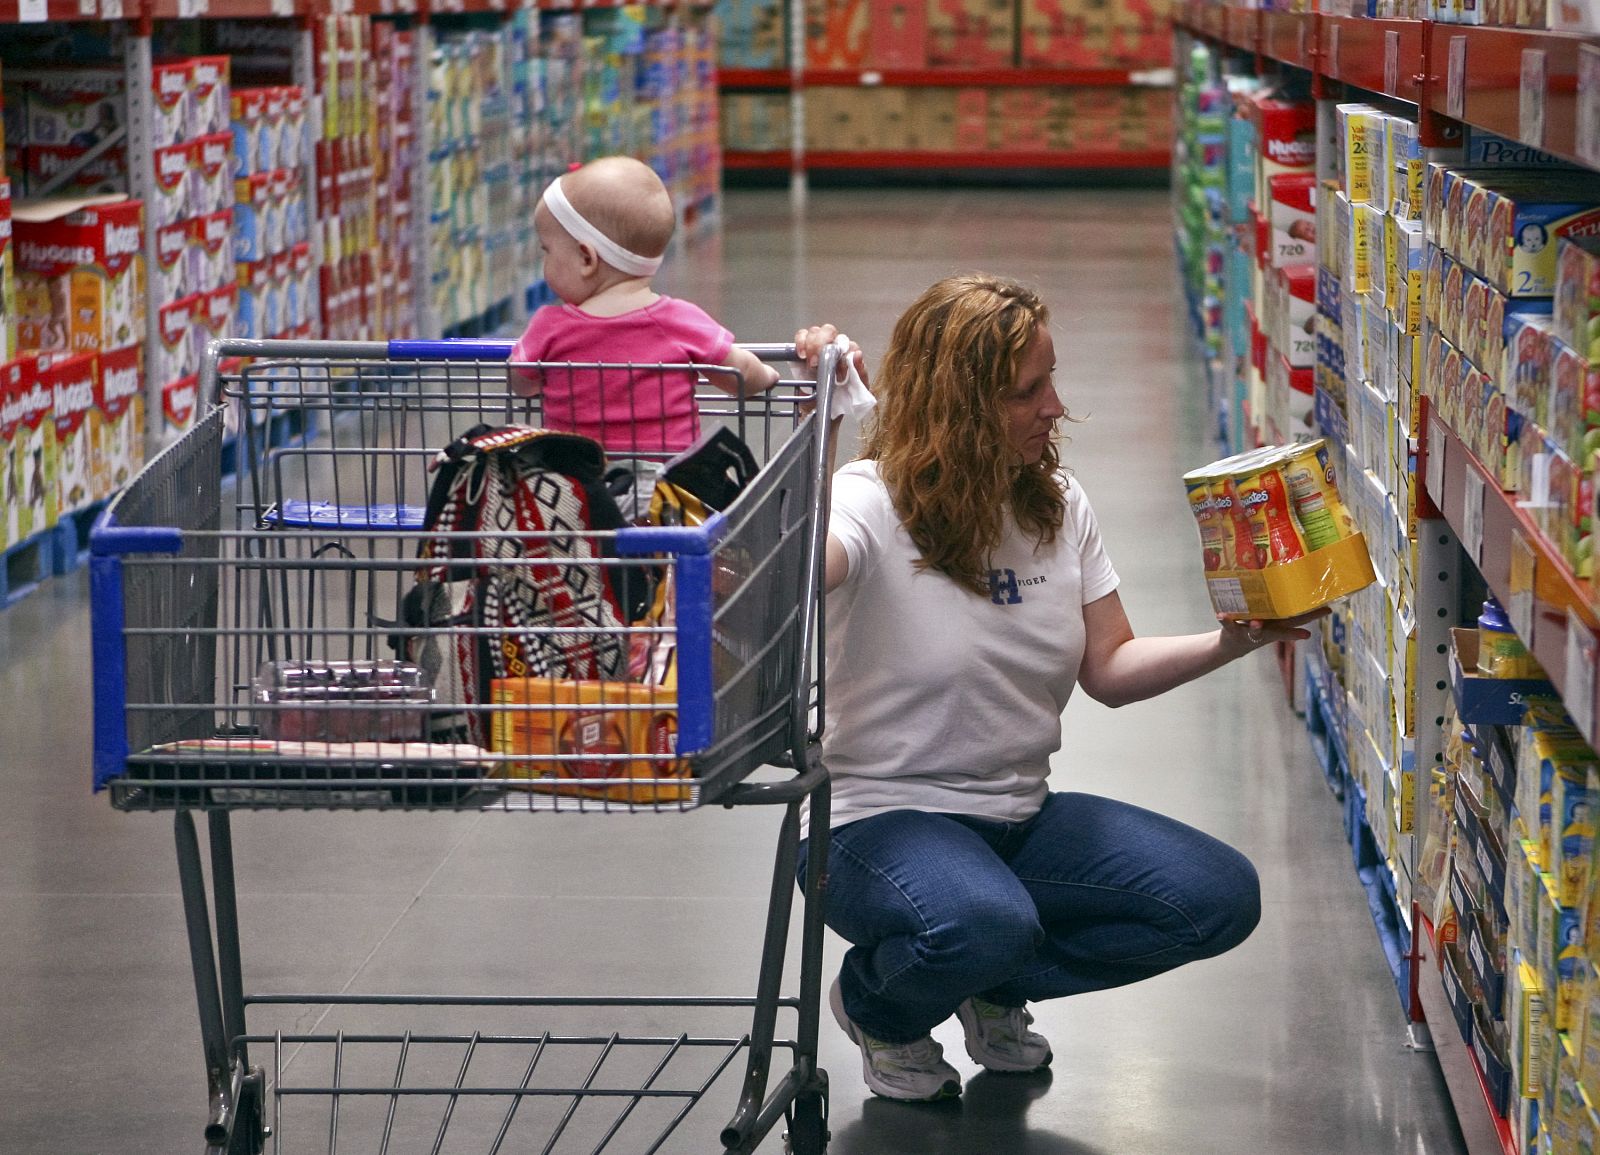 A customer shops in the expanded baby department at a remodelled Sam's Club in Rogers, Arkansas